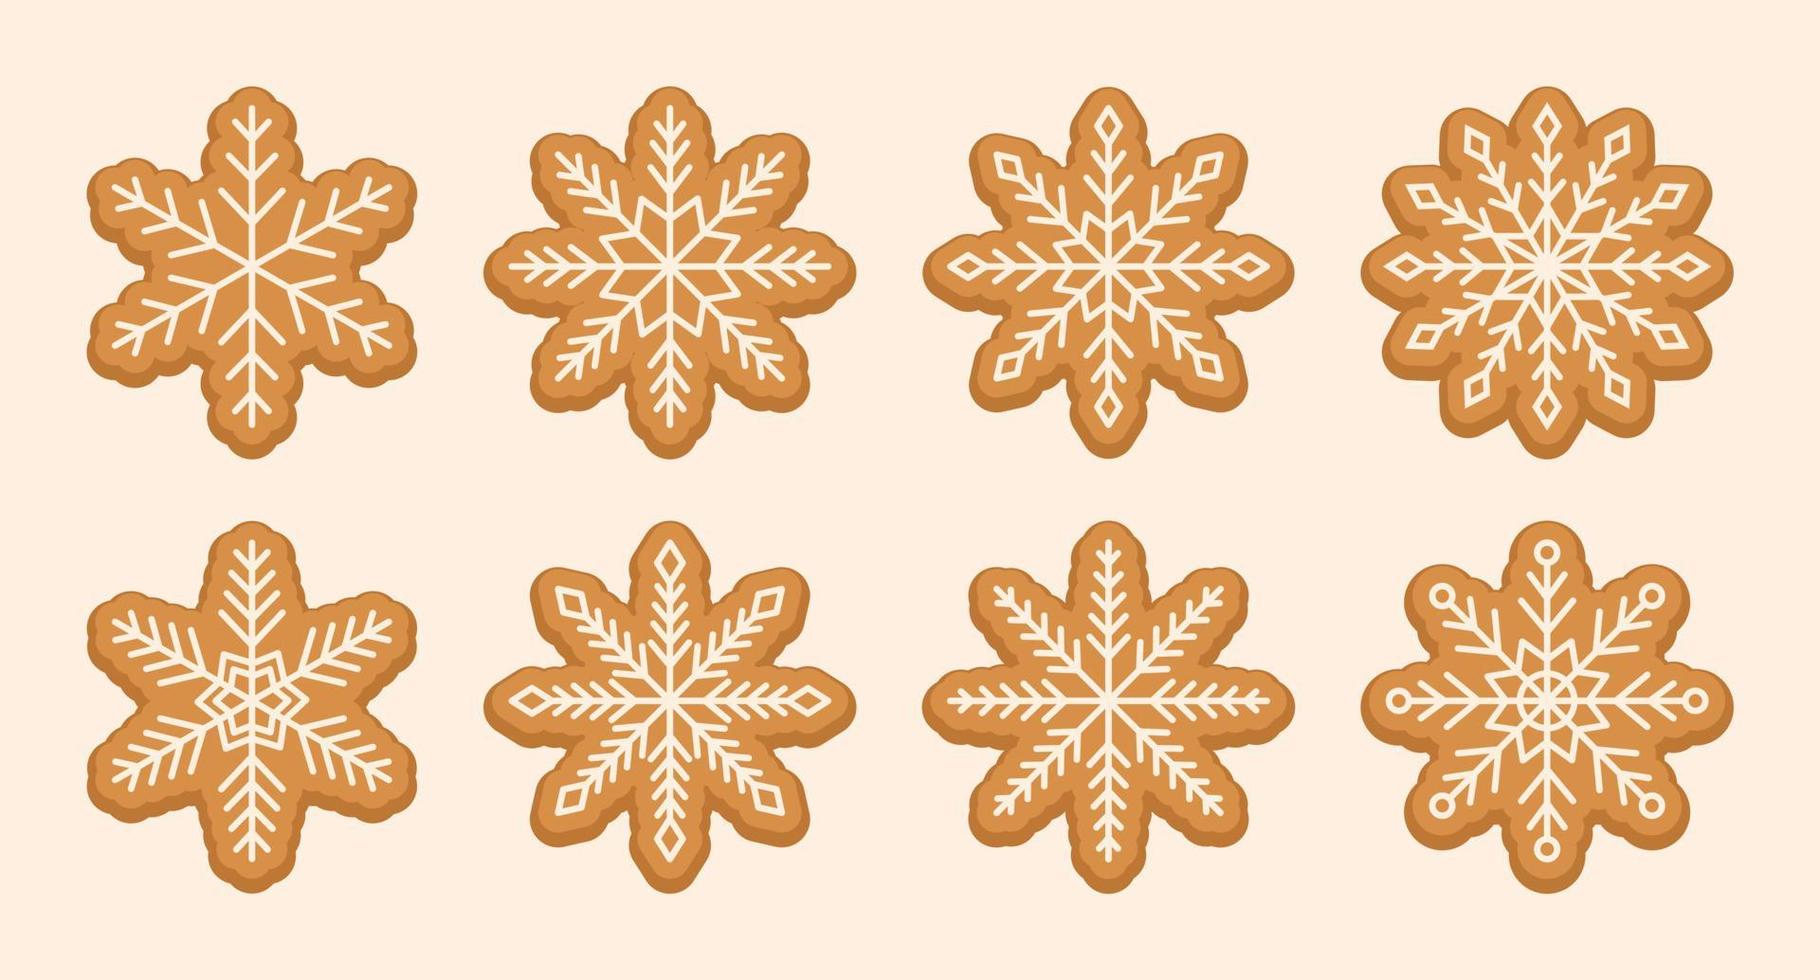 Simple gingerbread snowflake sweet cookies with sugar glazed. Christmas holiday food. vector